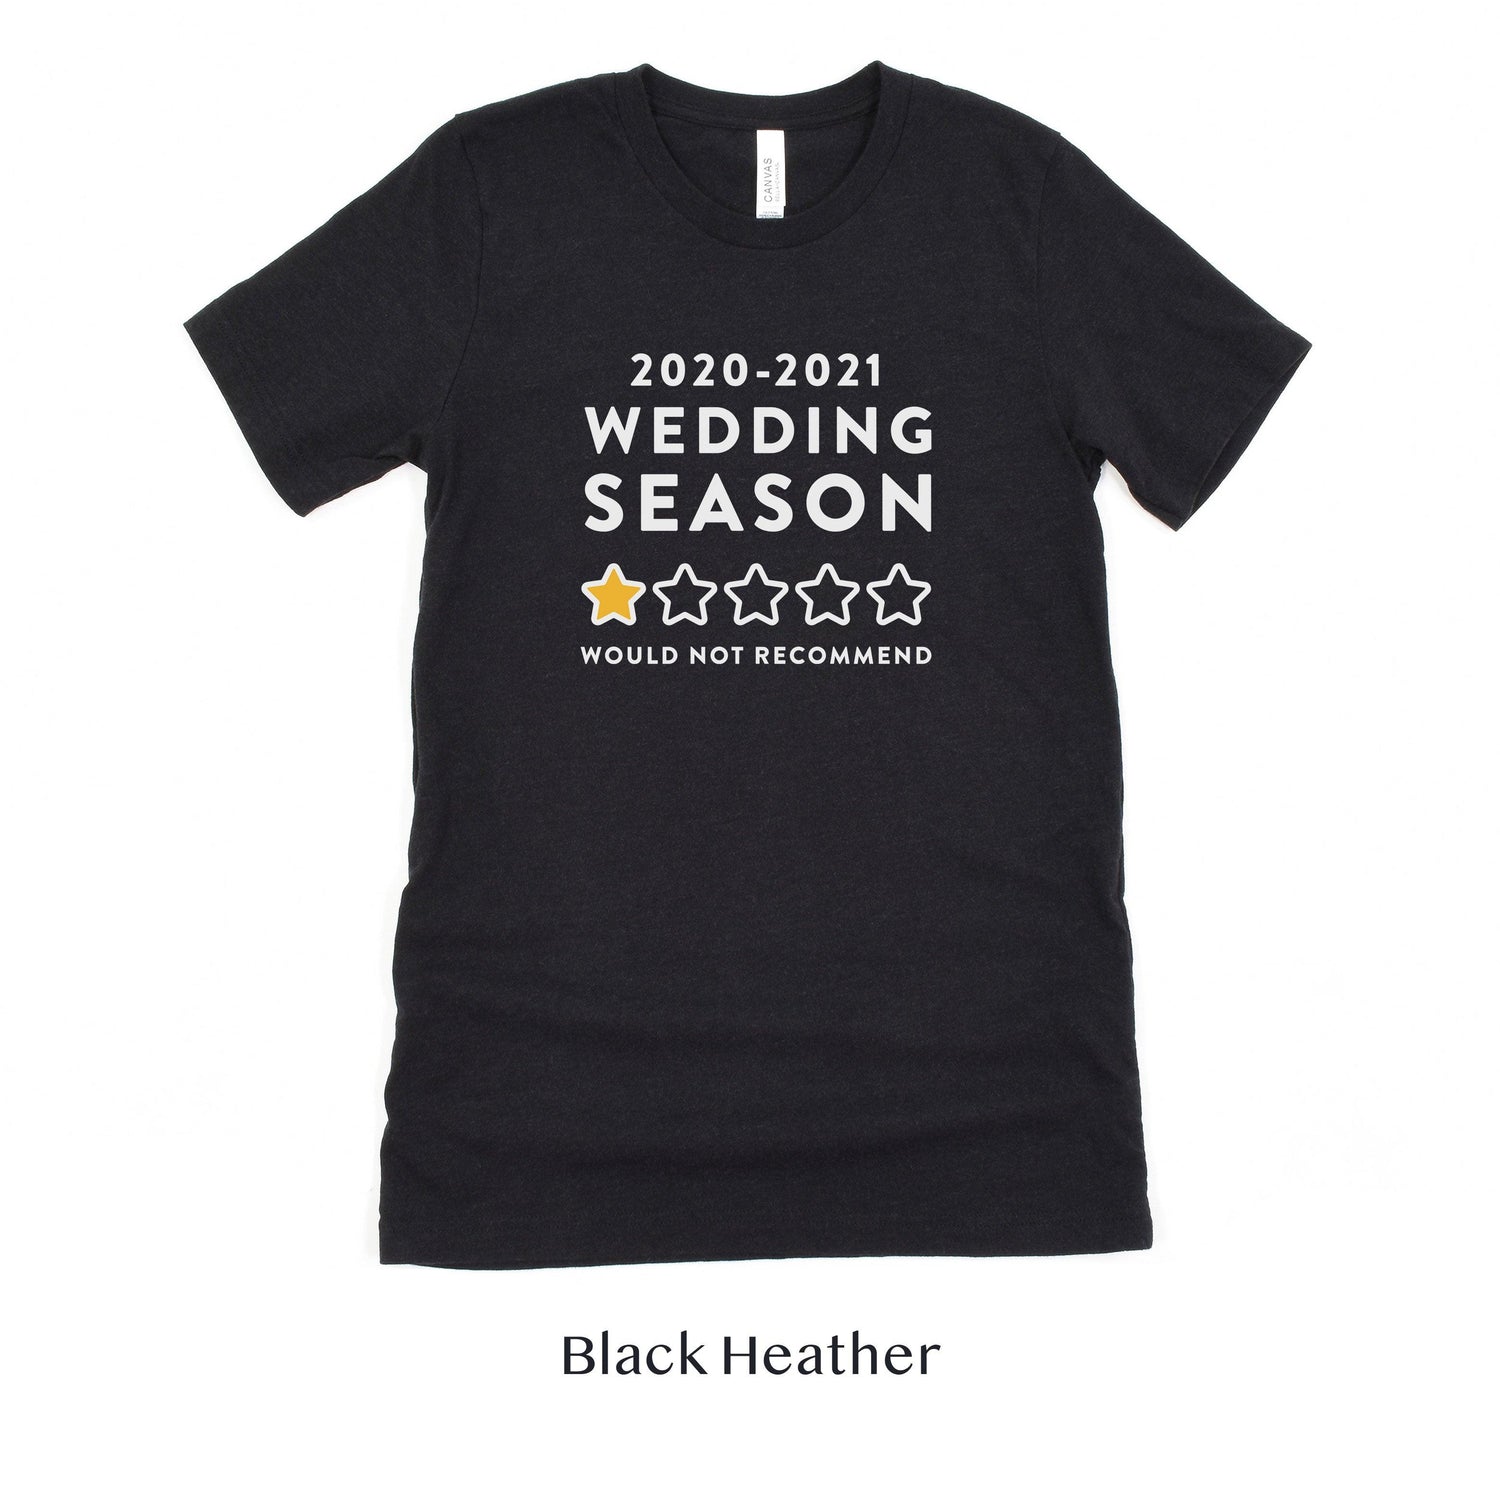 Would Not Recommend - Wedding Industry Professionals Tshirt by Oaklynn Lane - Black Heather Tee